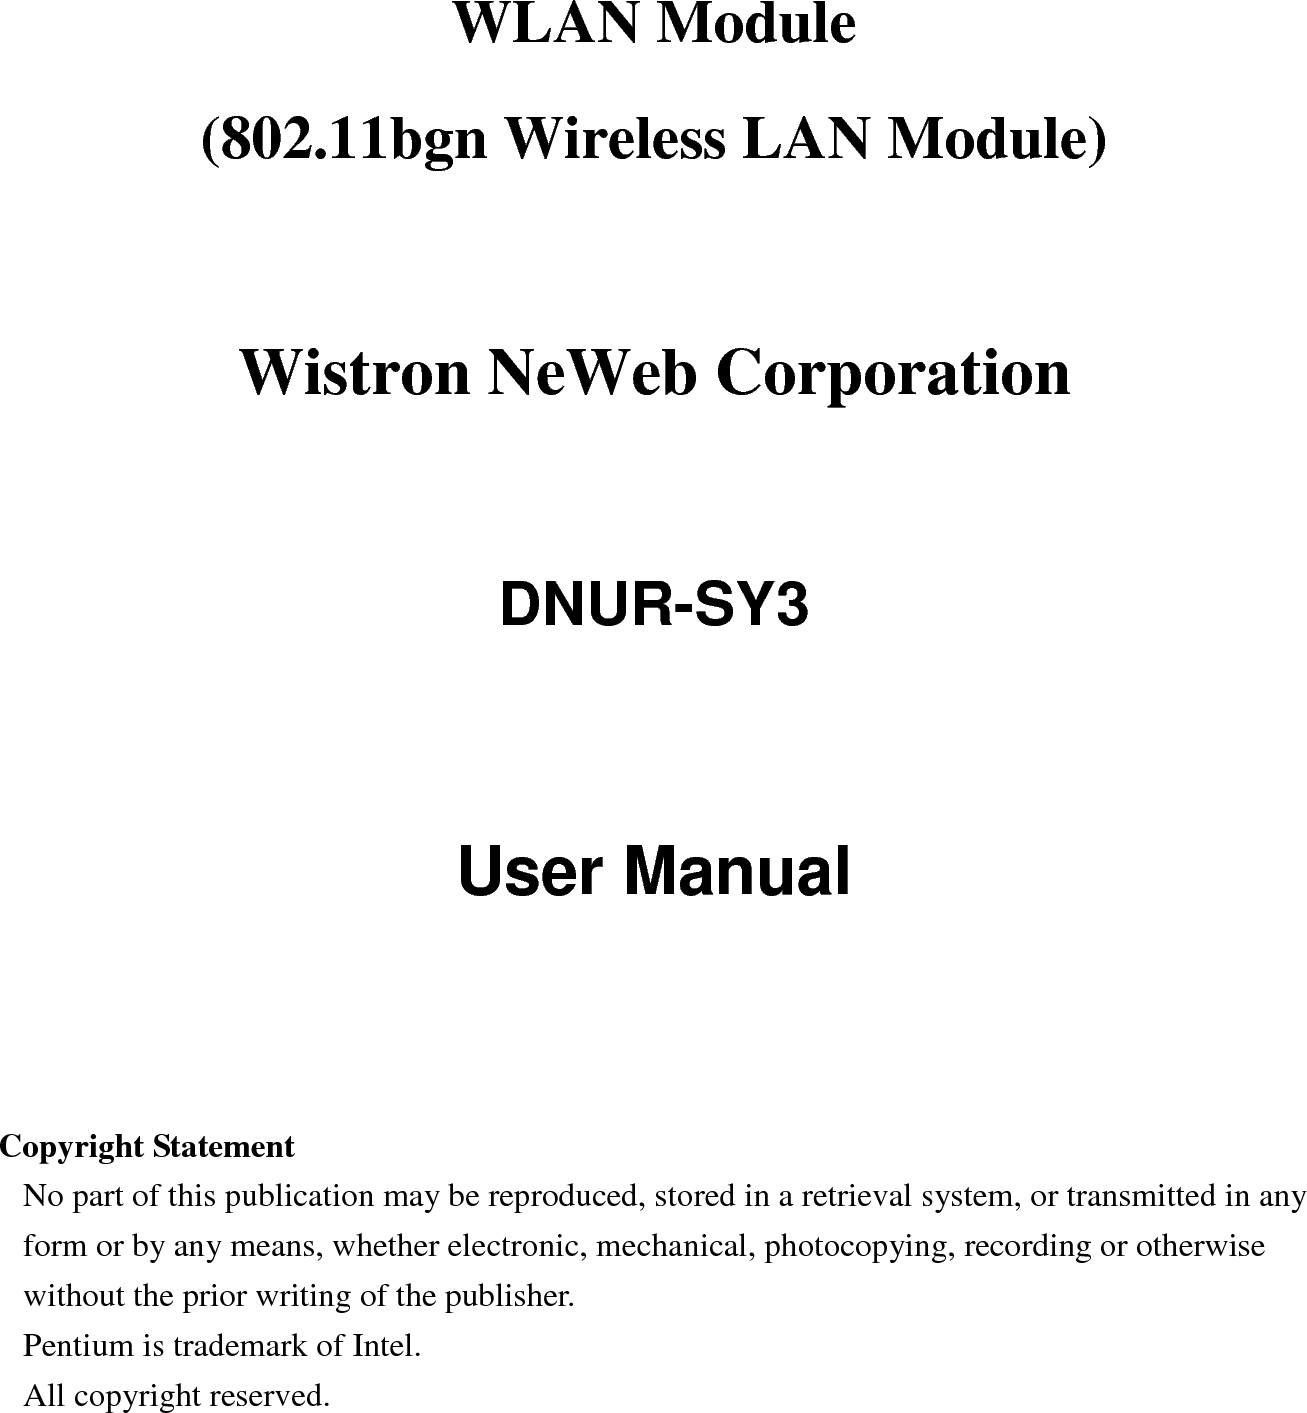 WLAN Module     (802.11bgn Wireless LAN Module)    Wistron NeWeb Corporation  DNUR-SY3   User Manual     Copyright Statement No part of this publication may be reproduced, stored in a retrieval system, or transmitted in any form or by any means, whether electronic, mechanical, photocopying, recording or otherwise without the prior writing of the publisher. Pentium is trademark of Intel.   All copyright reserved.  